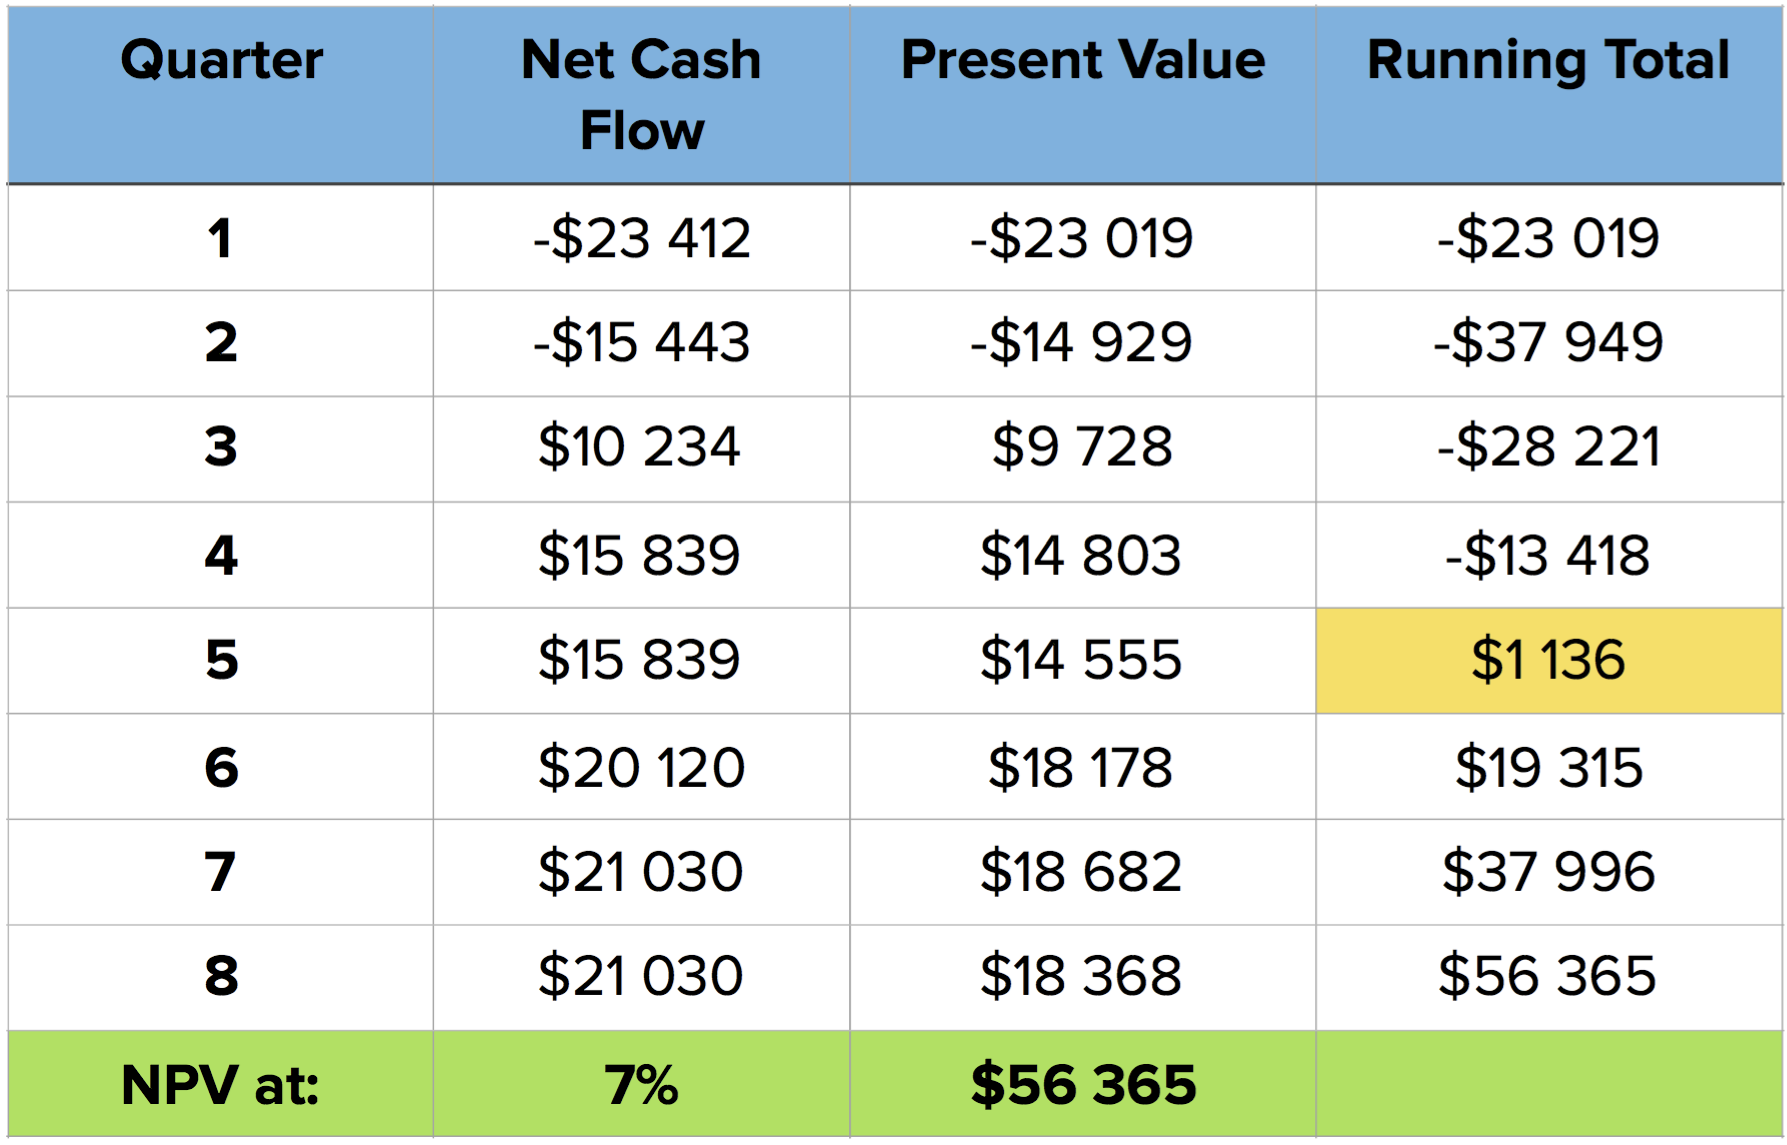 Discounted Payback Period table example. We recover our investment by the 5th quarter